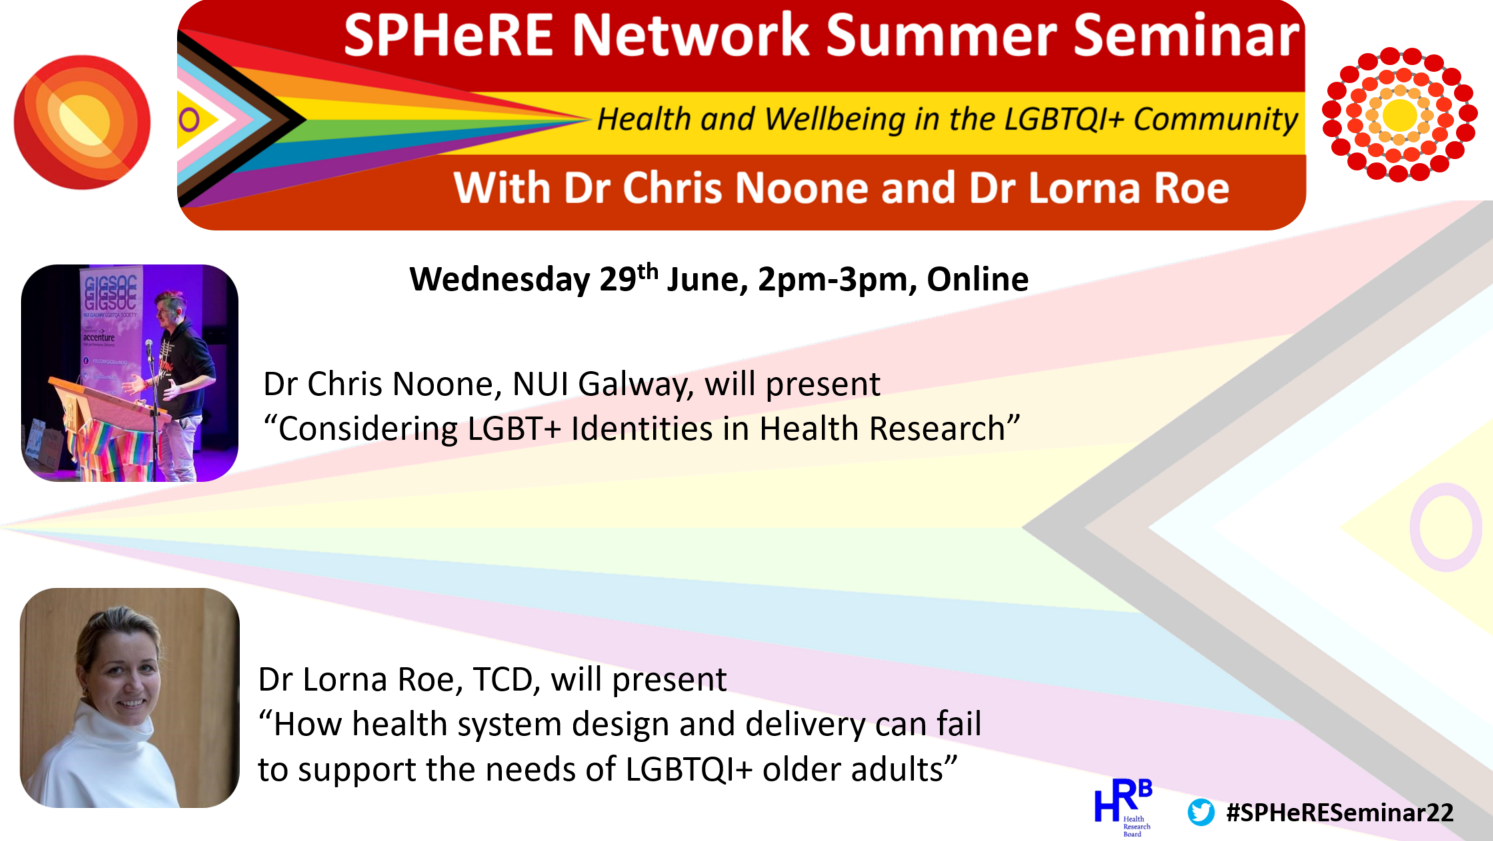 SPHeRE Network Summer Seminar: Health and Wellbeing in the LGBTQI+ Community. With Dr Chris Noone and Dr Lorna Roe. Wednesday 29th June, 2pm-3pm, Online. Dr Chris Noone, NUI Galway will present "Considering LGBT+ Identities in Health Research." Dr Lorna Roe, TCD, will present "How health system design and delivery can fail to support the needs of LGBTQI+ older adults". #SPHeRESeminar22